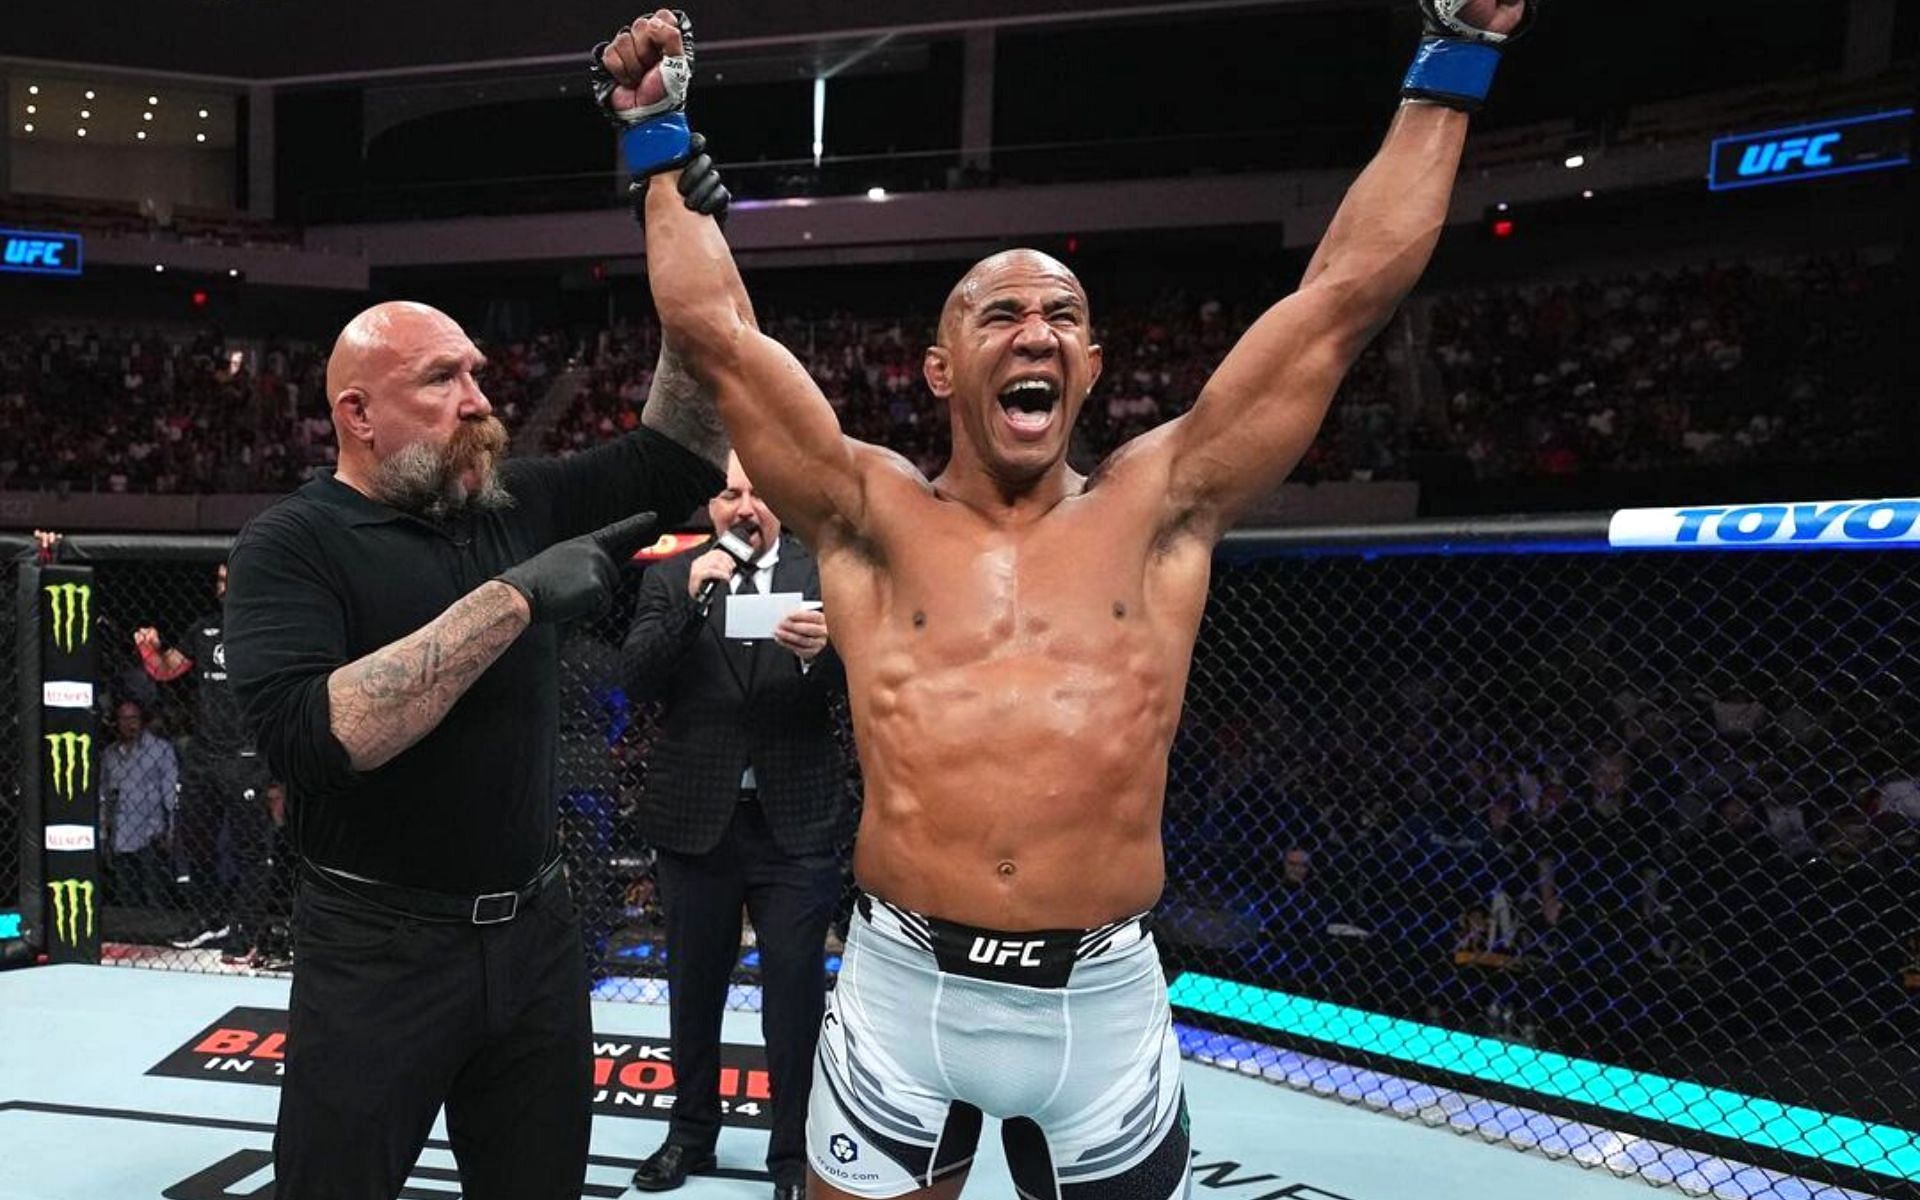 What is the UFC middleweight Gregory Rodrigues's nickname?